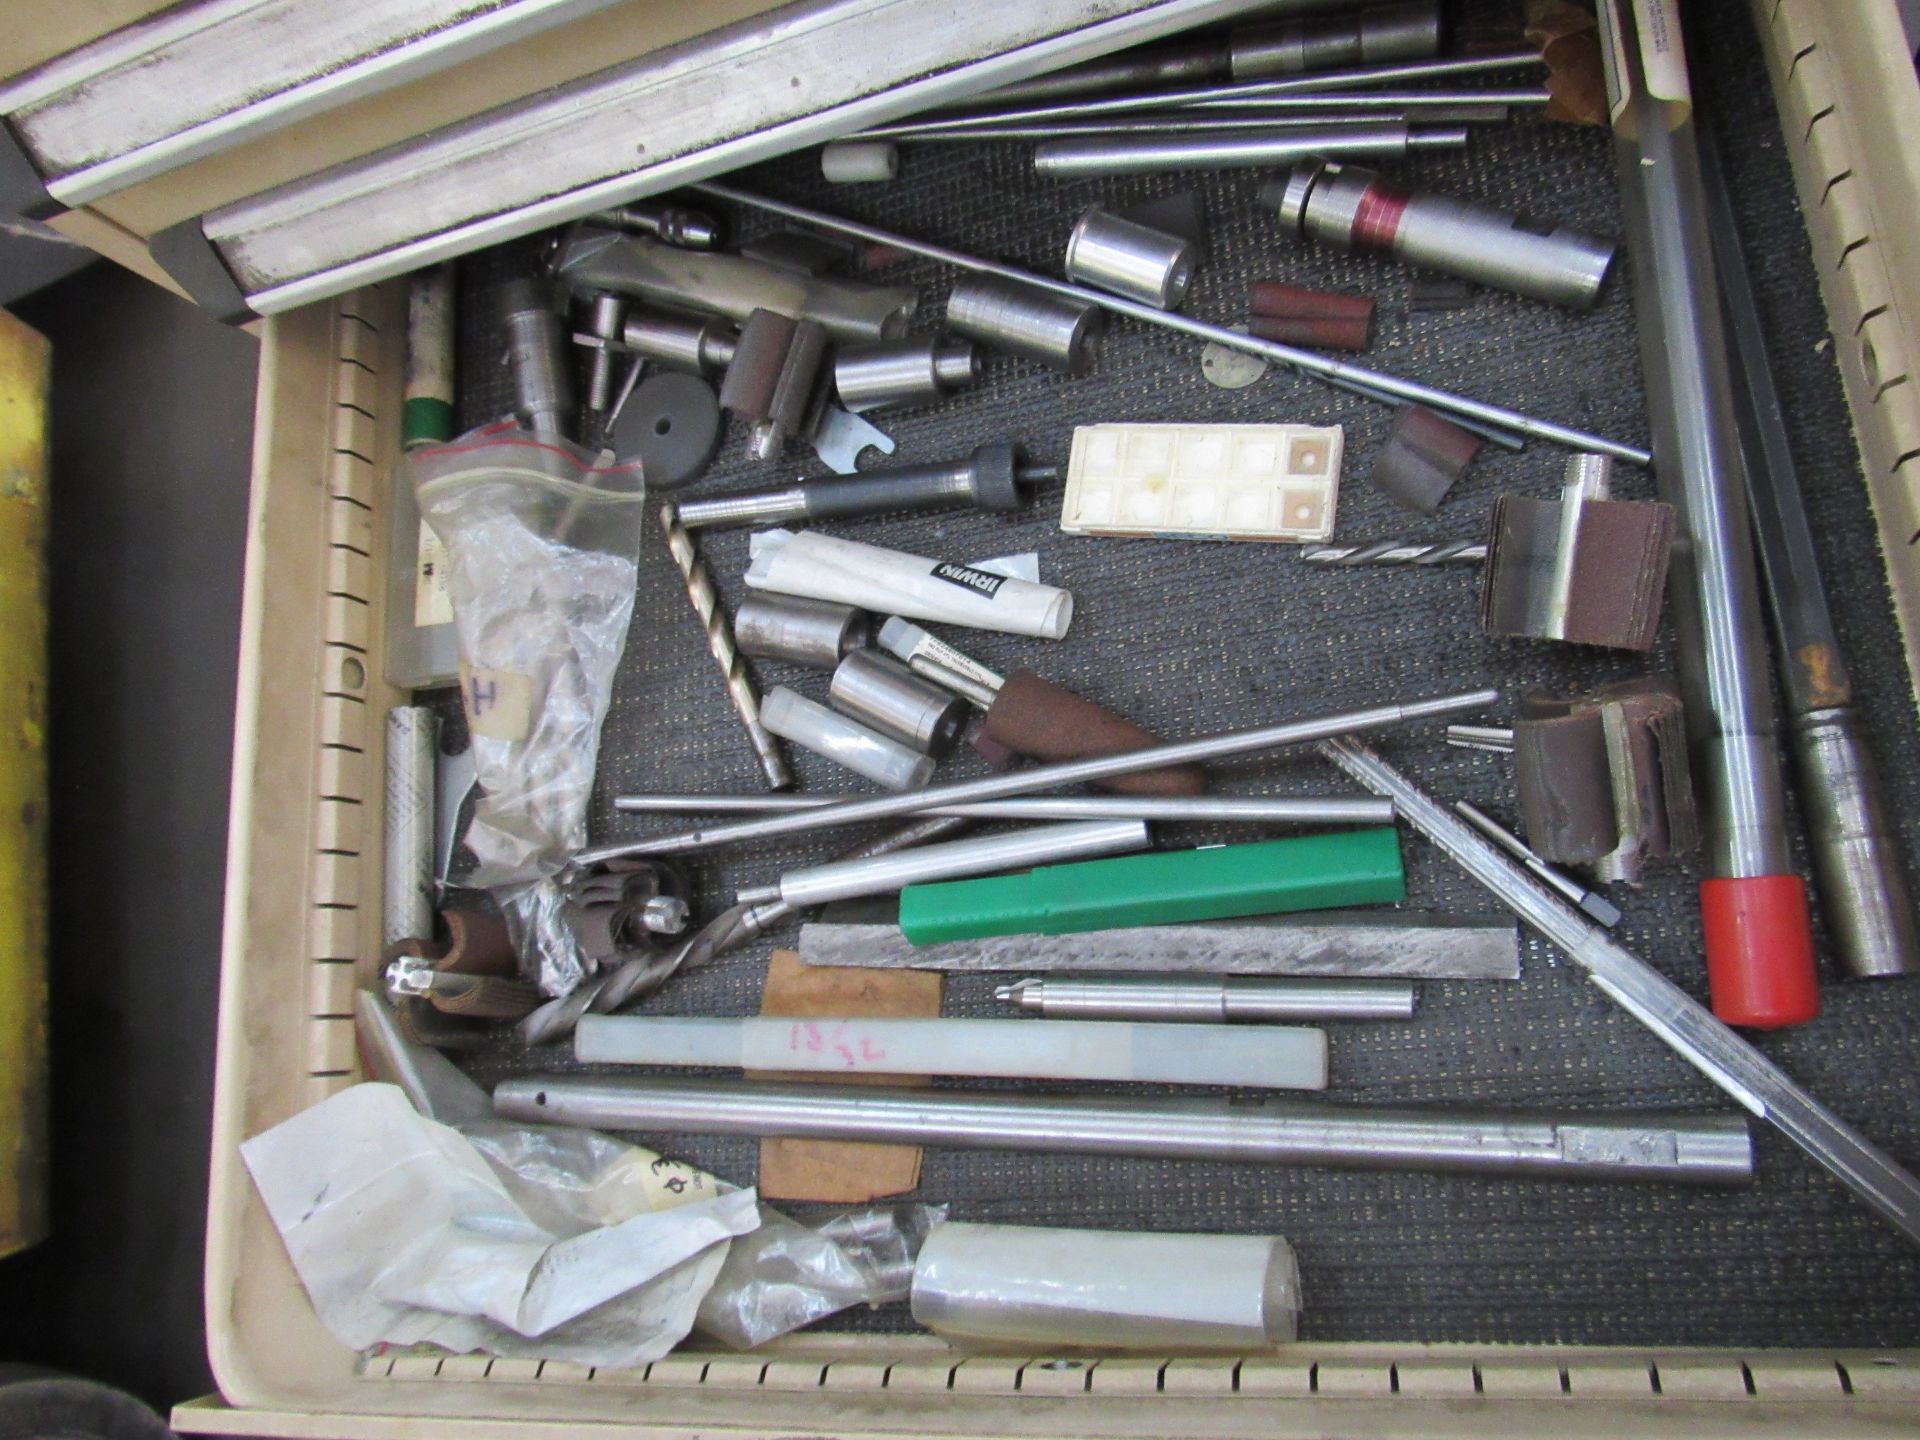 Four Kennedy 7 Drawer Tool Cabinets, Connected, with Contents (Inspections Tools, Dies, Drill - Image 7 of 7